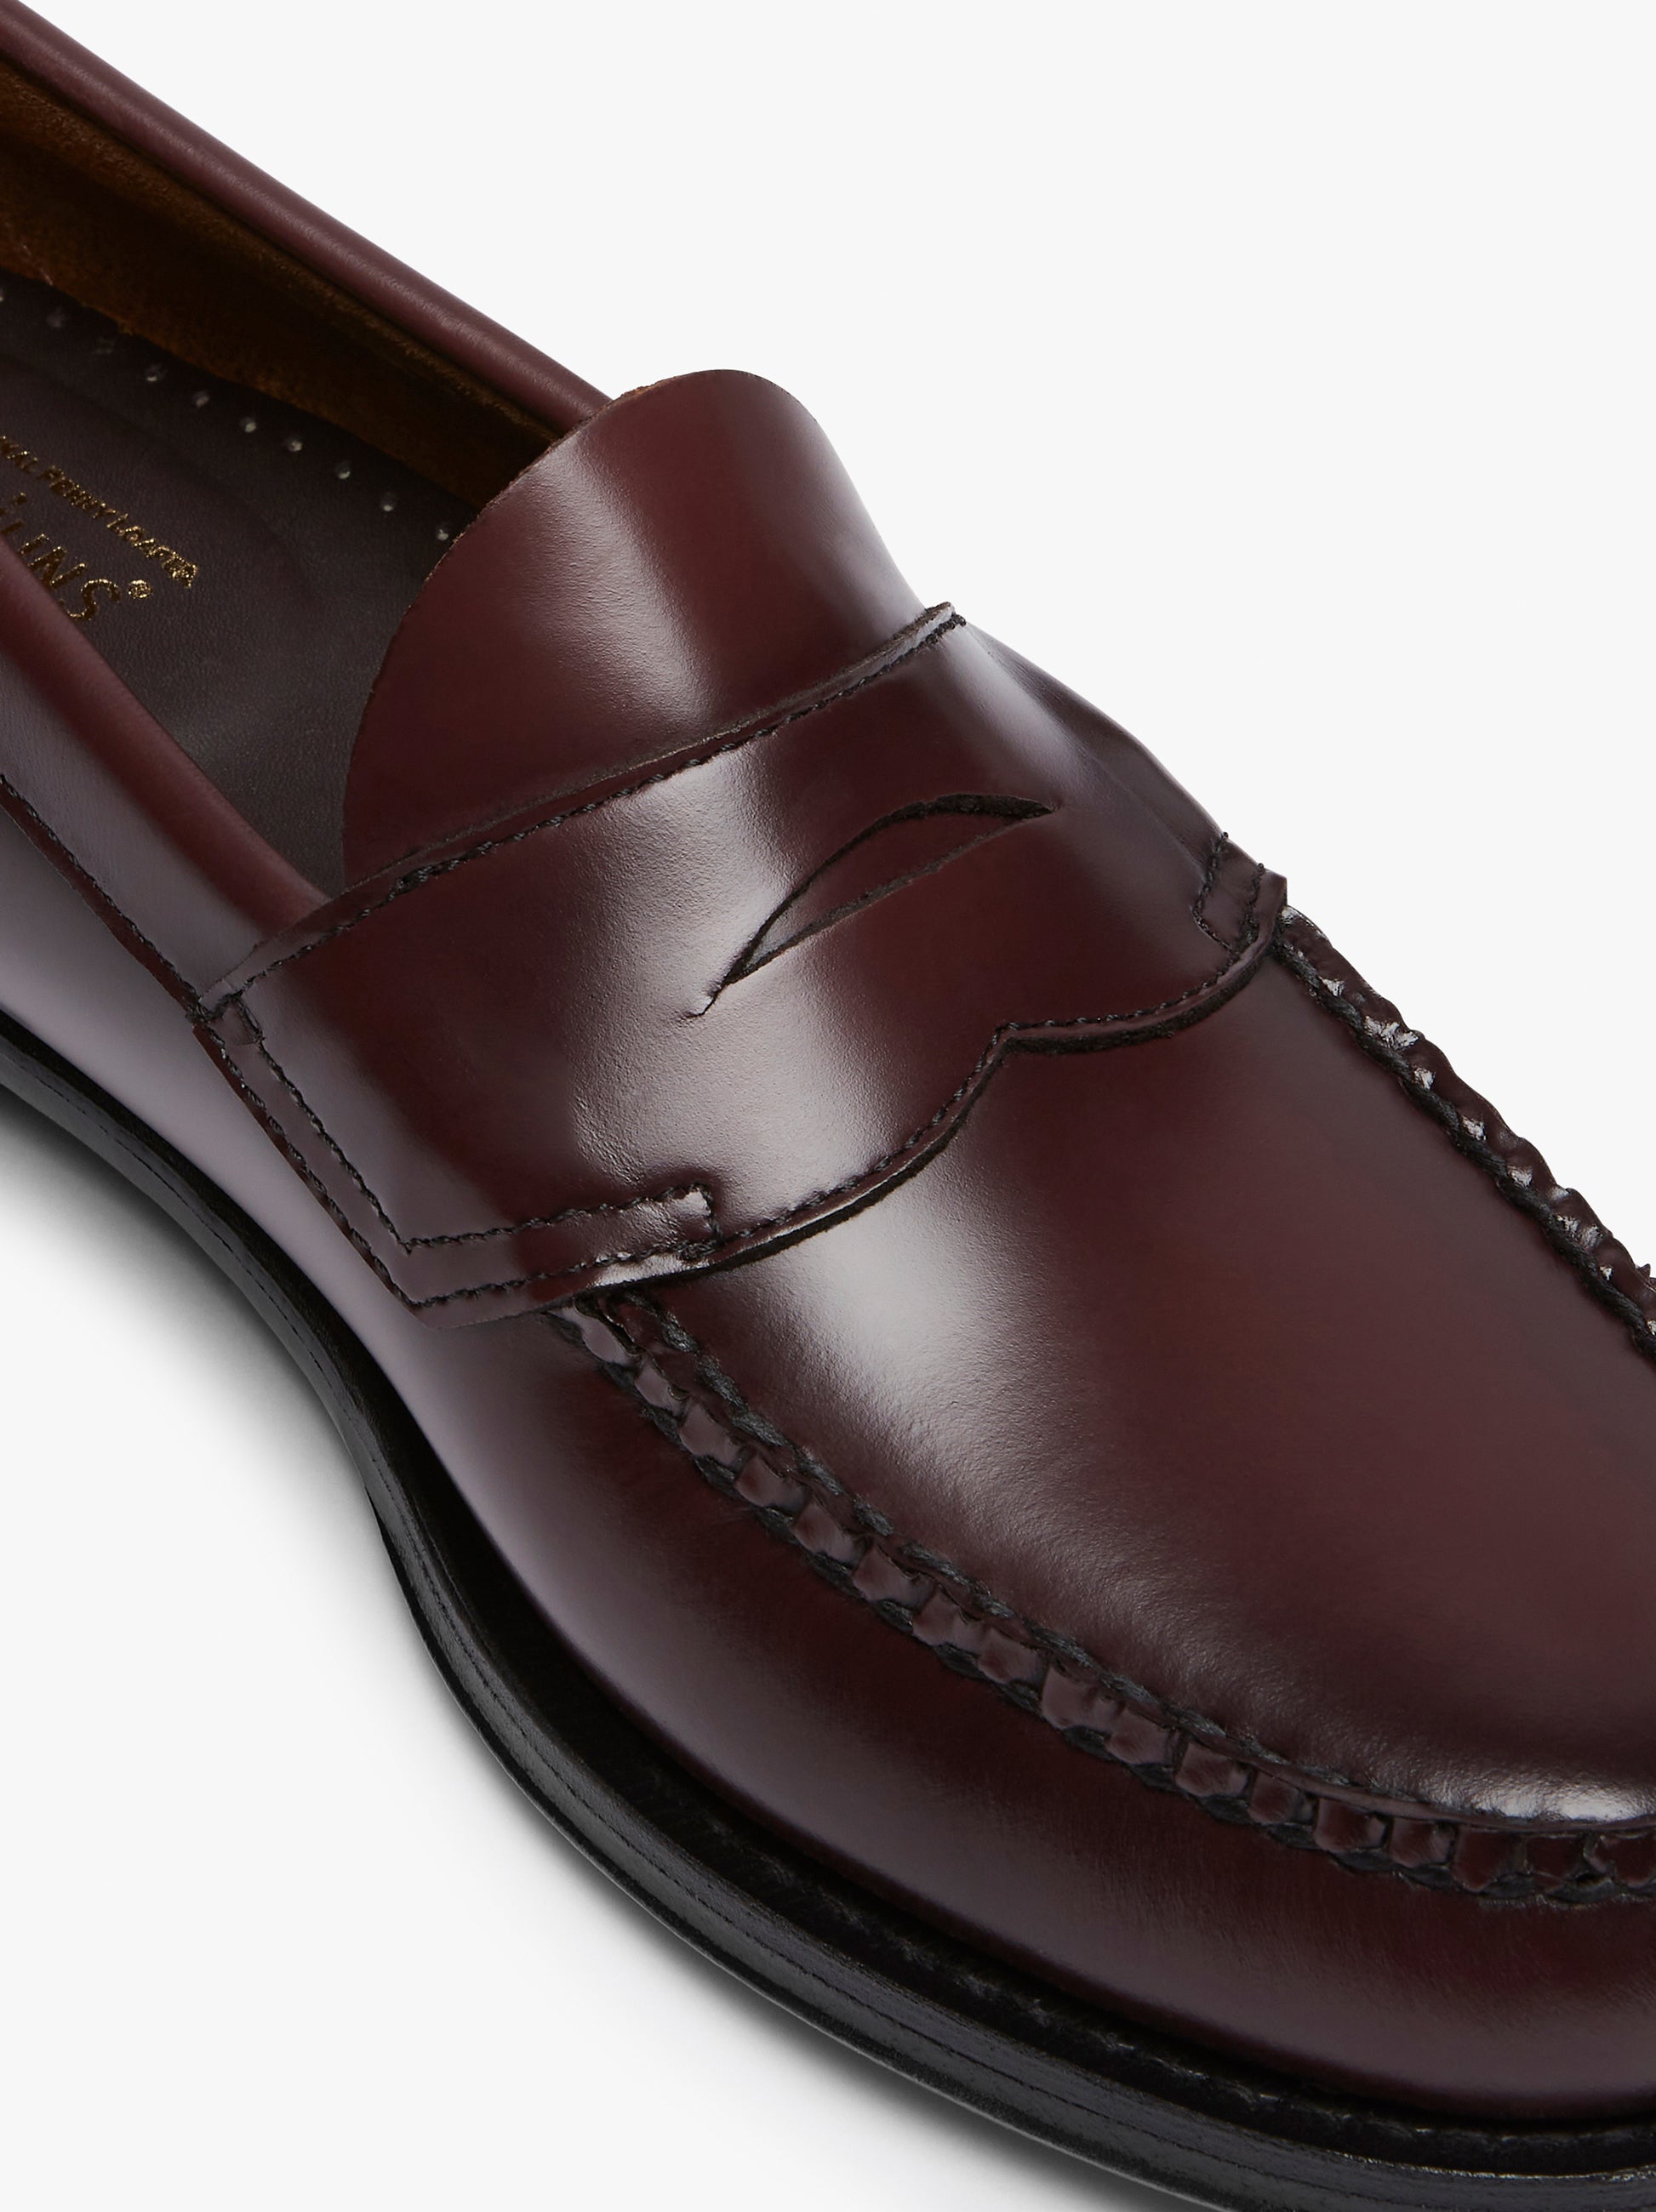 Weejuns Logan Penny loafers – G.H.BASS 1876